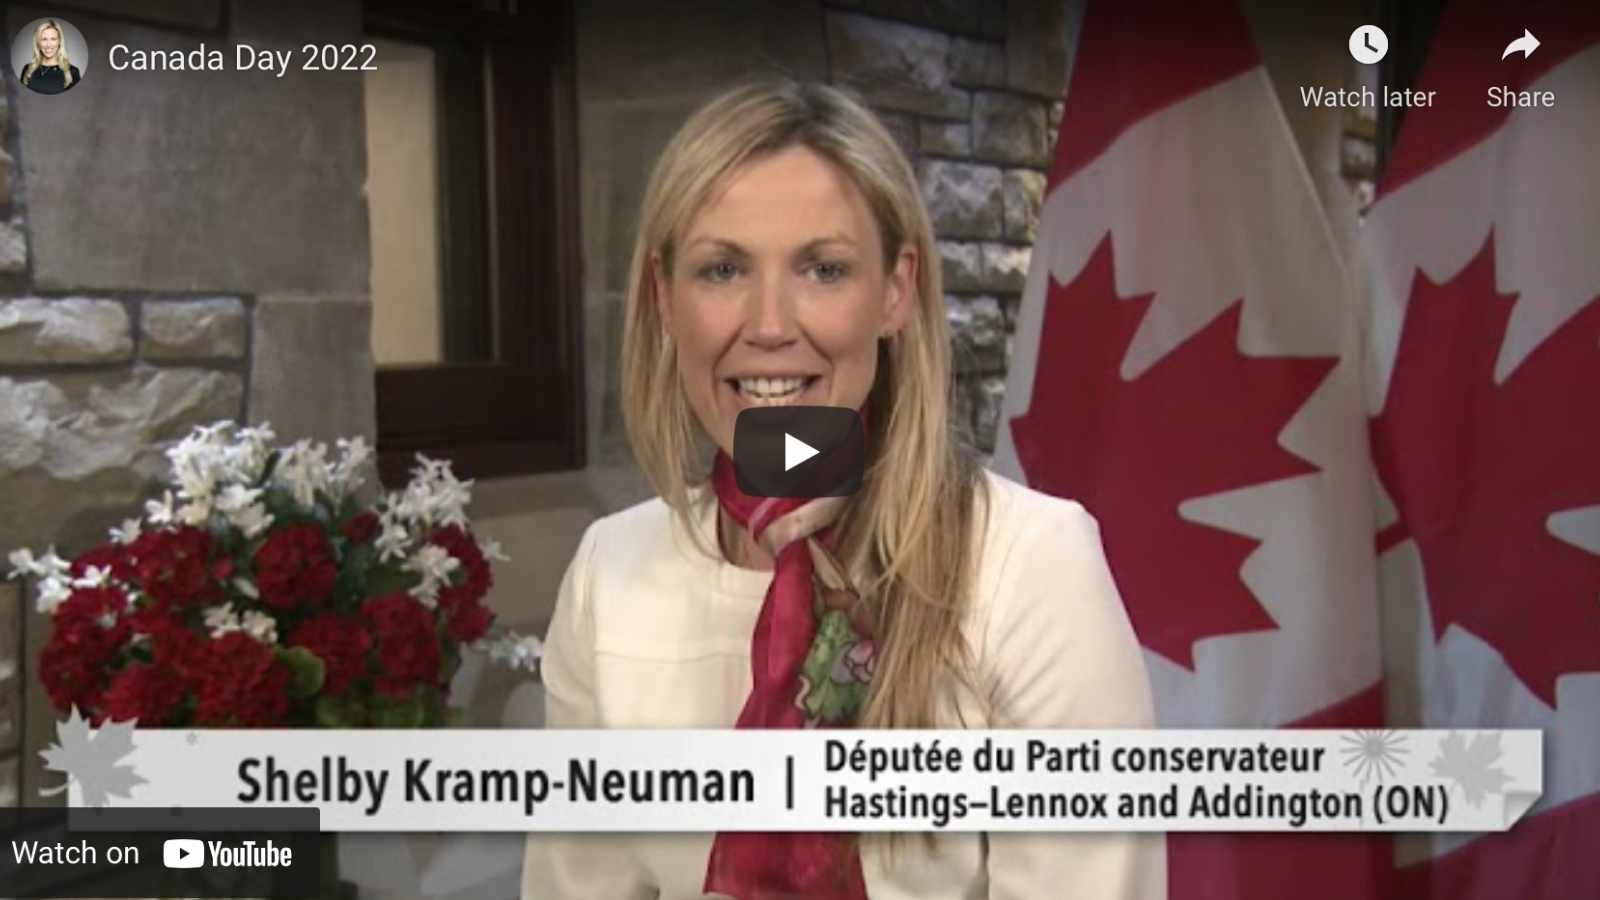 Shelby Kramp-Neuman MP in front of Canada flag